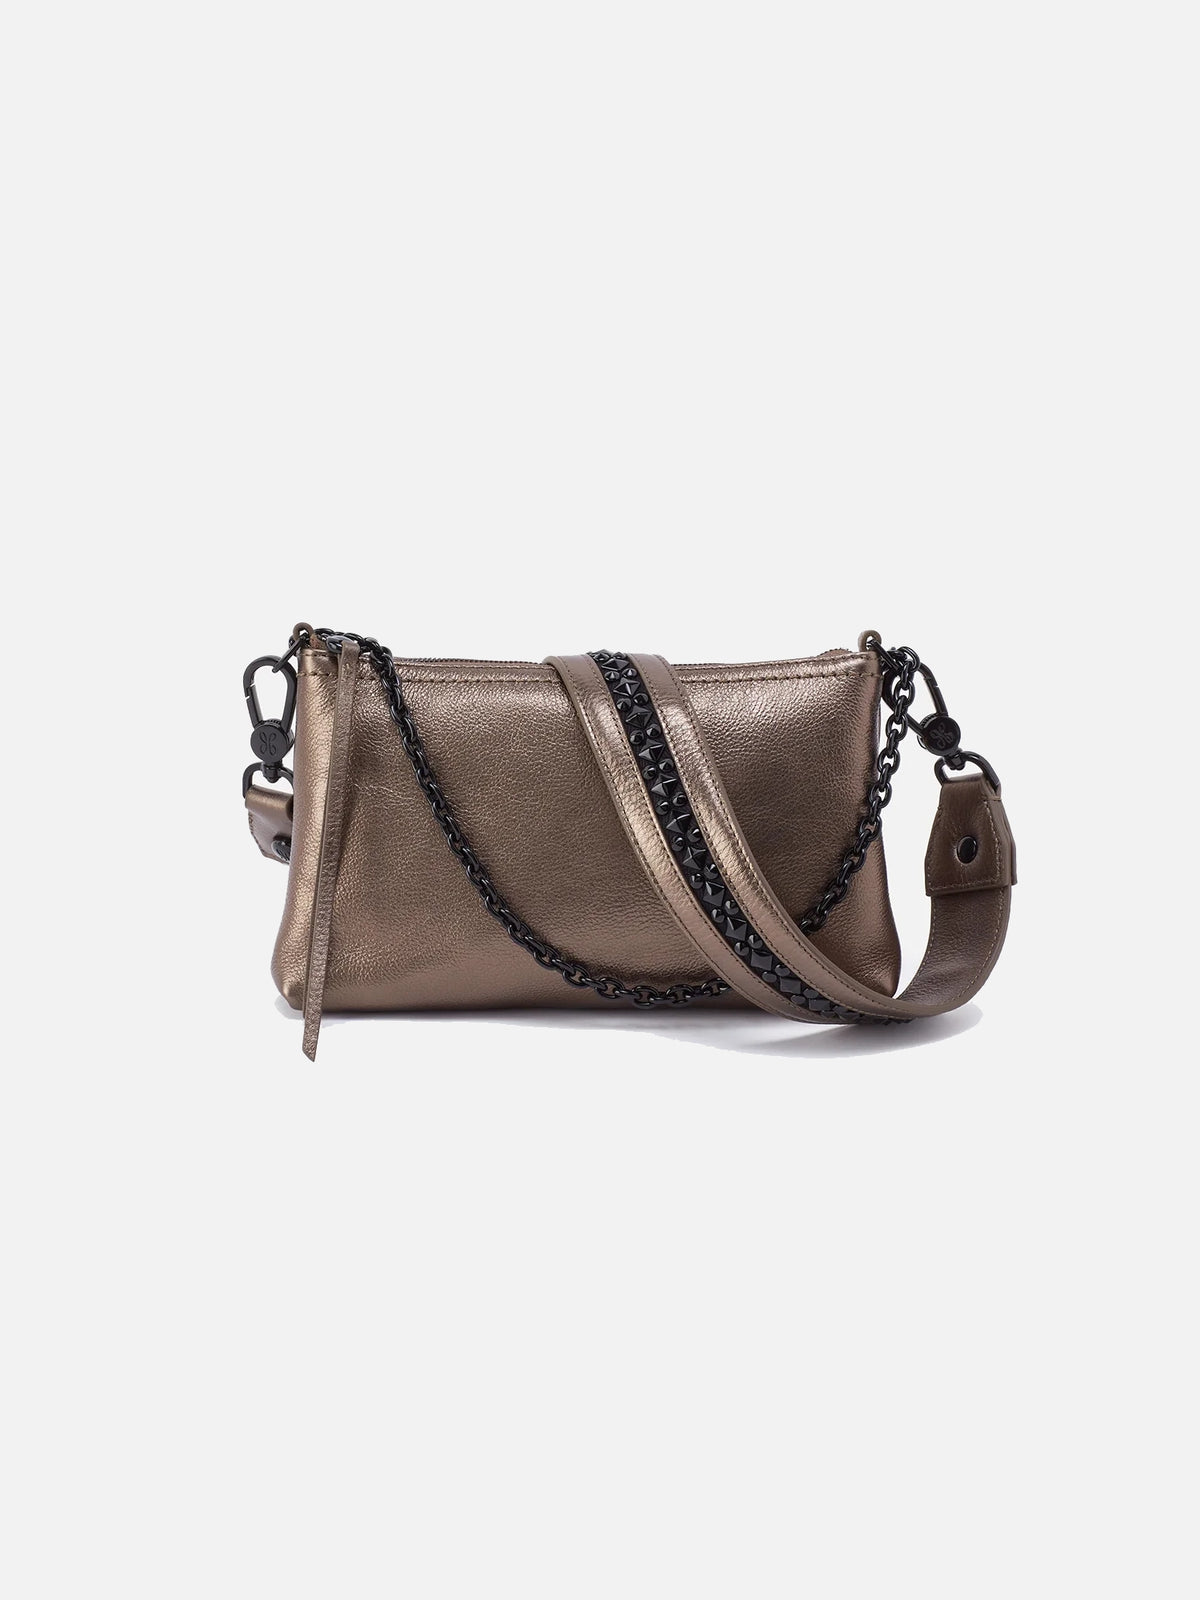 hobo darcy luxe crossbody bag in pewter metallic pebbled leather